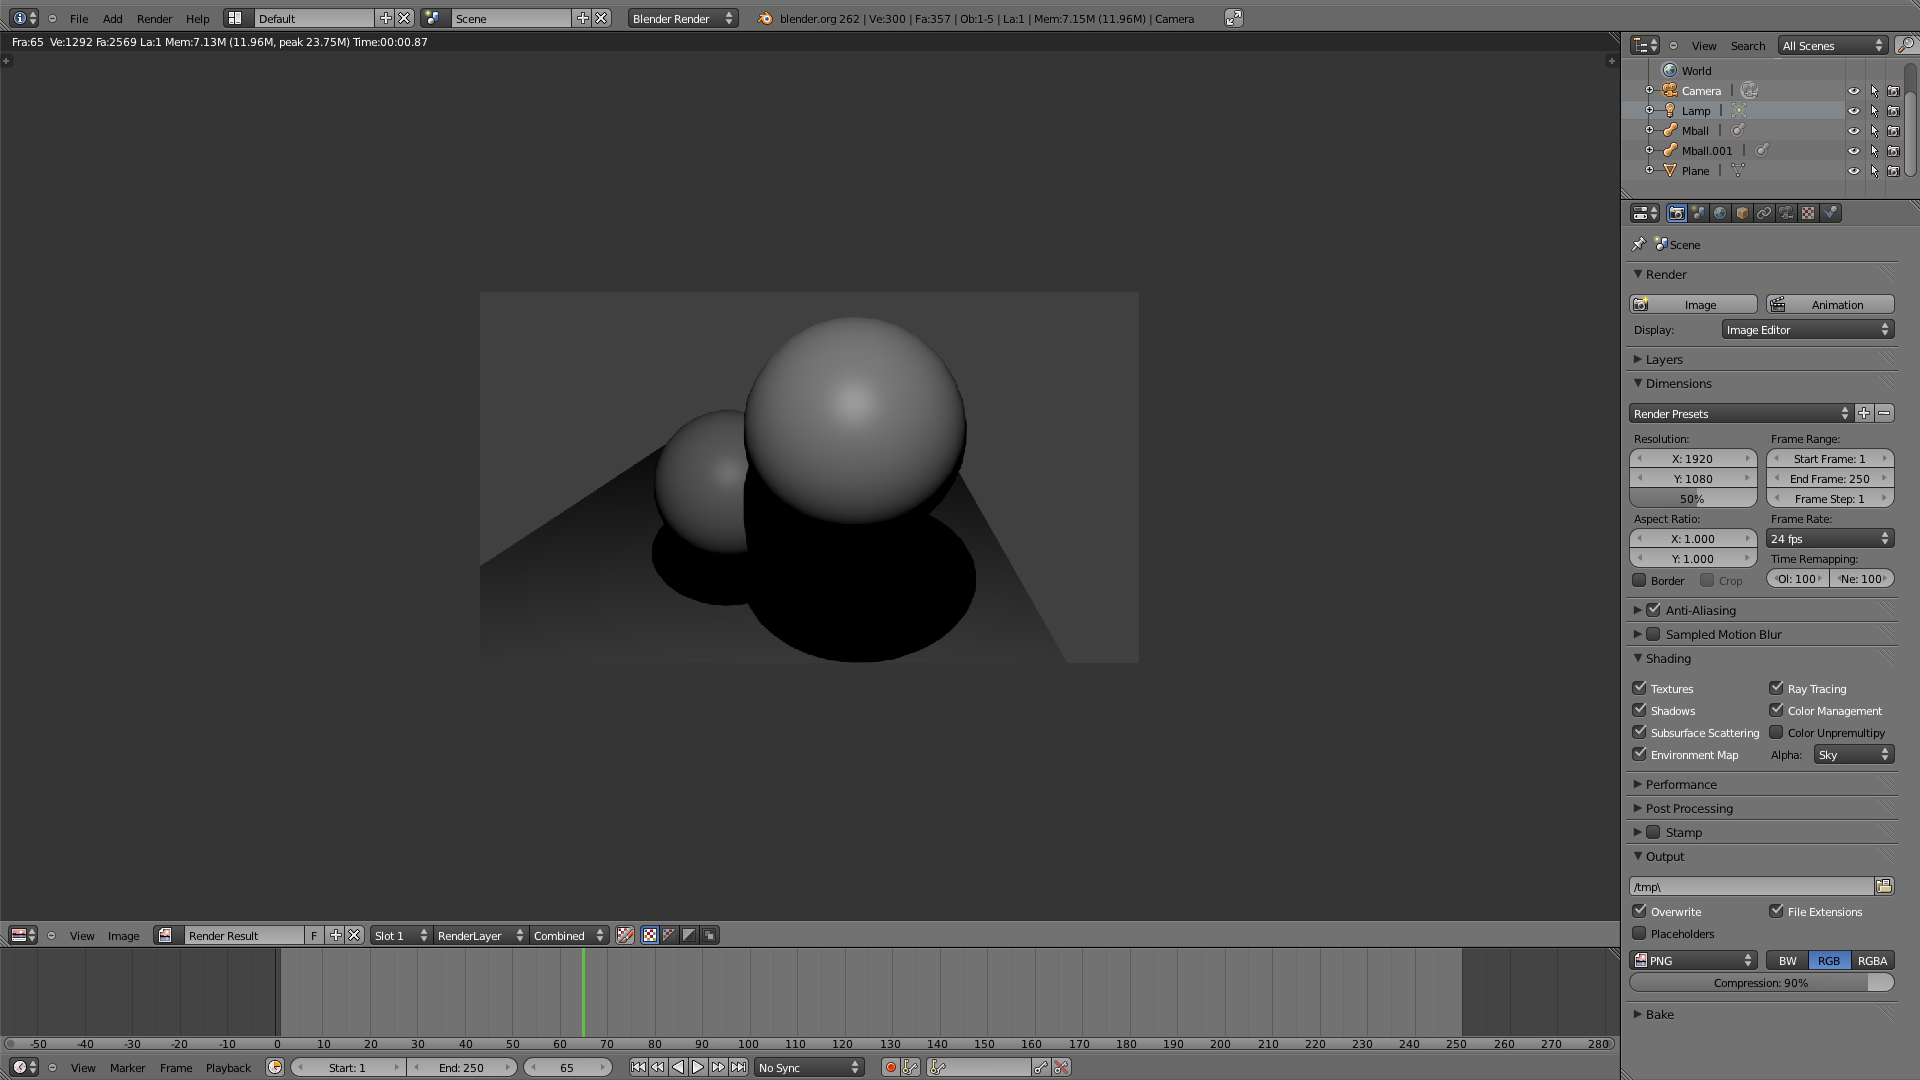 Ray tracing scene with 2 spheres, and a floor (rectangular plane) added in Blender